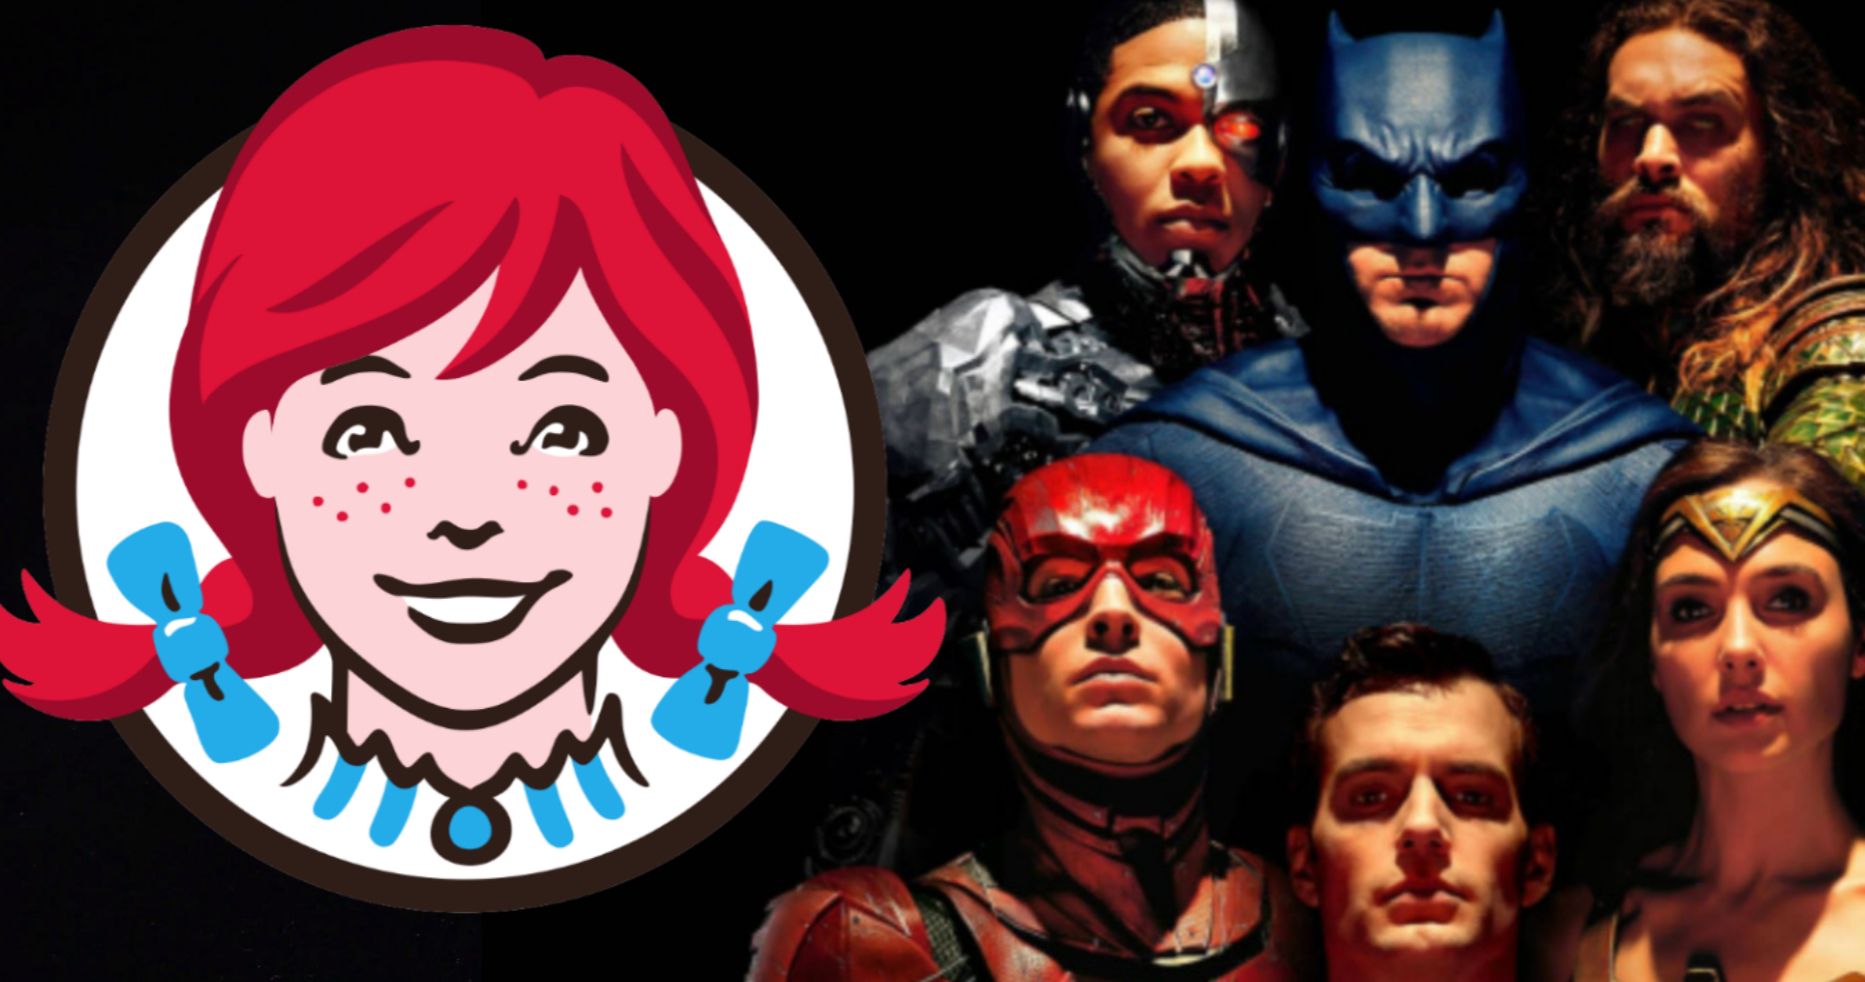 Subway Welcomes Wendy's Into the #ReleaseTheSnyderCut Movement